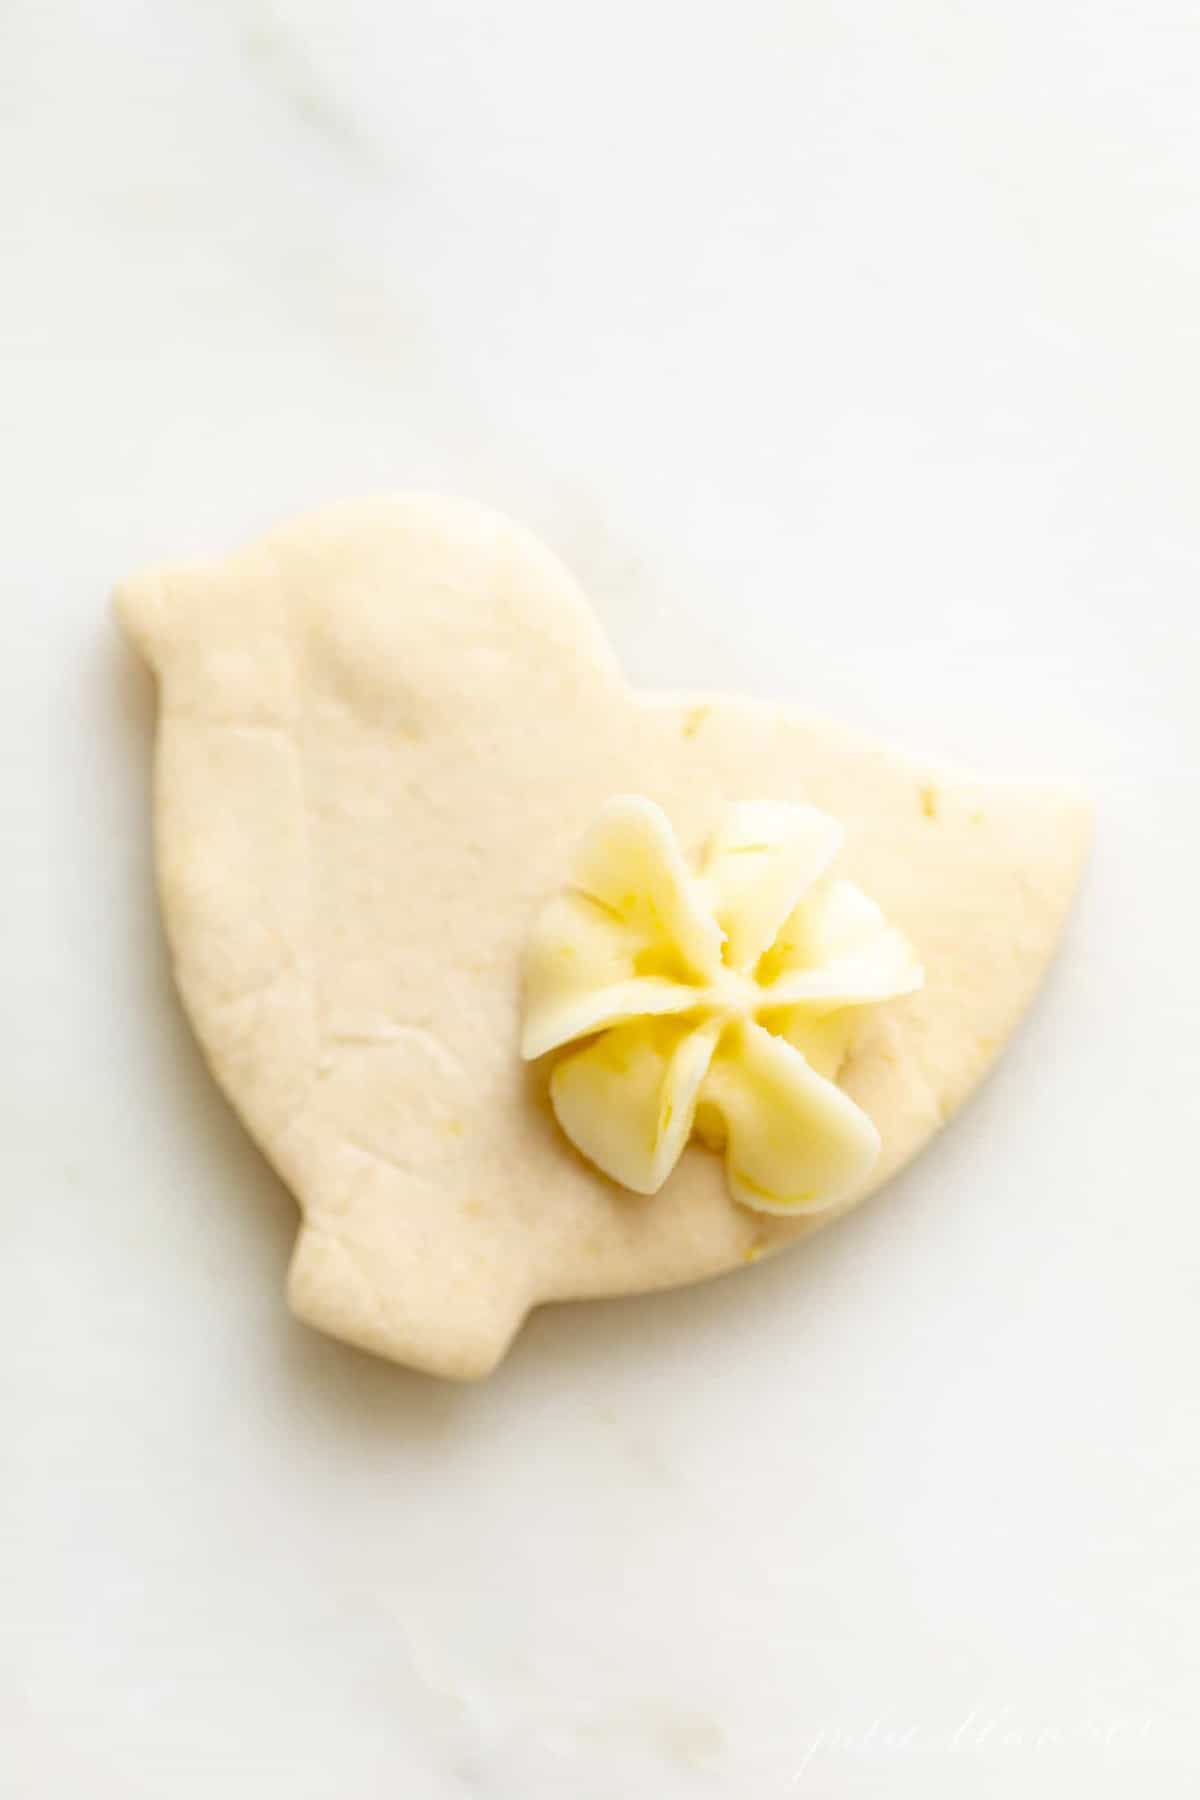 A duck shaped cookies, frosted with lemon icing in the shape of a small flower.